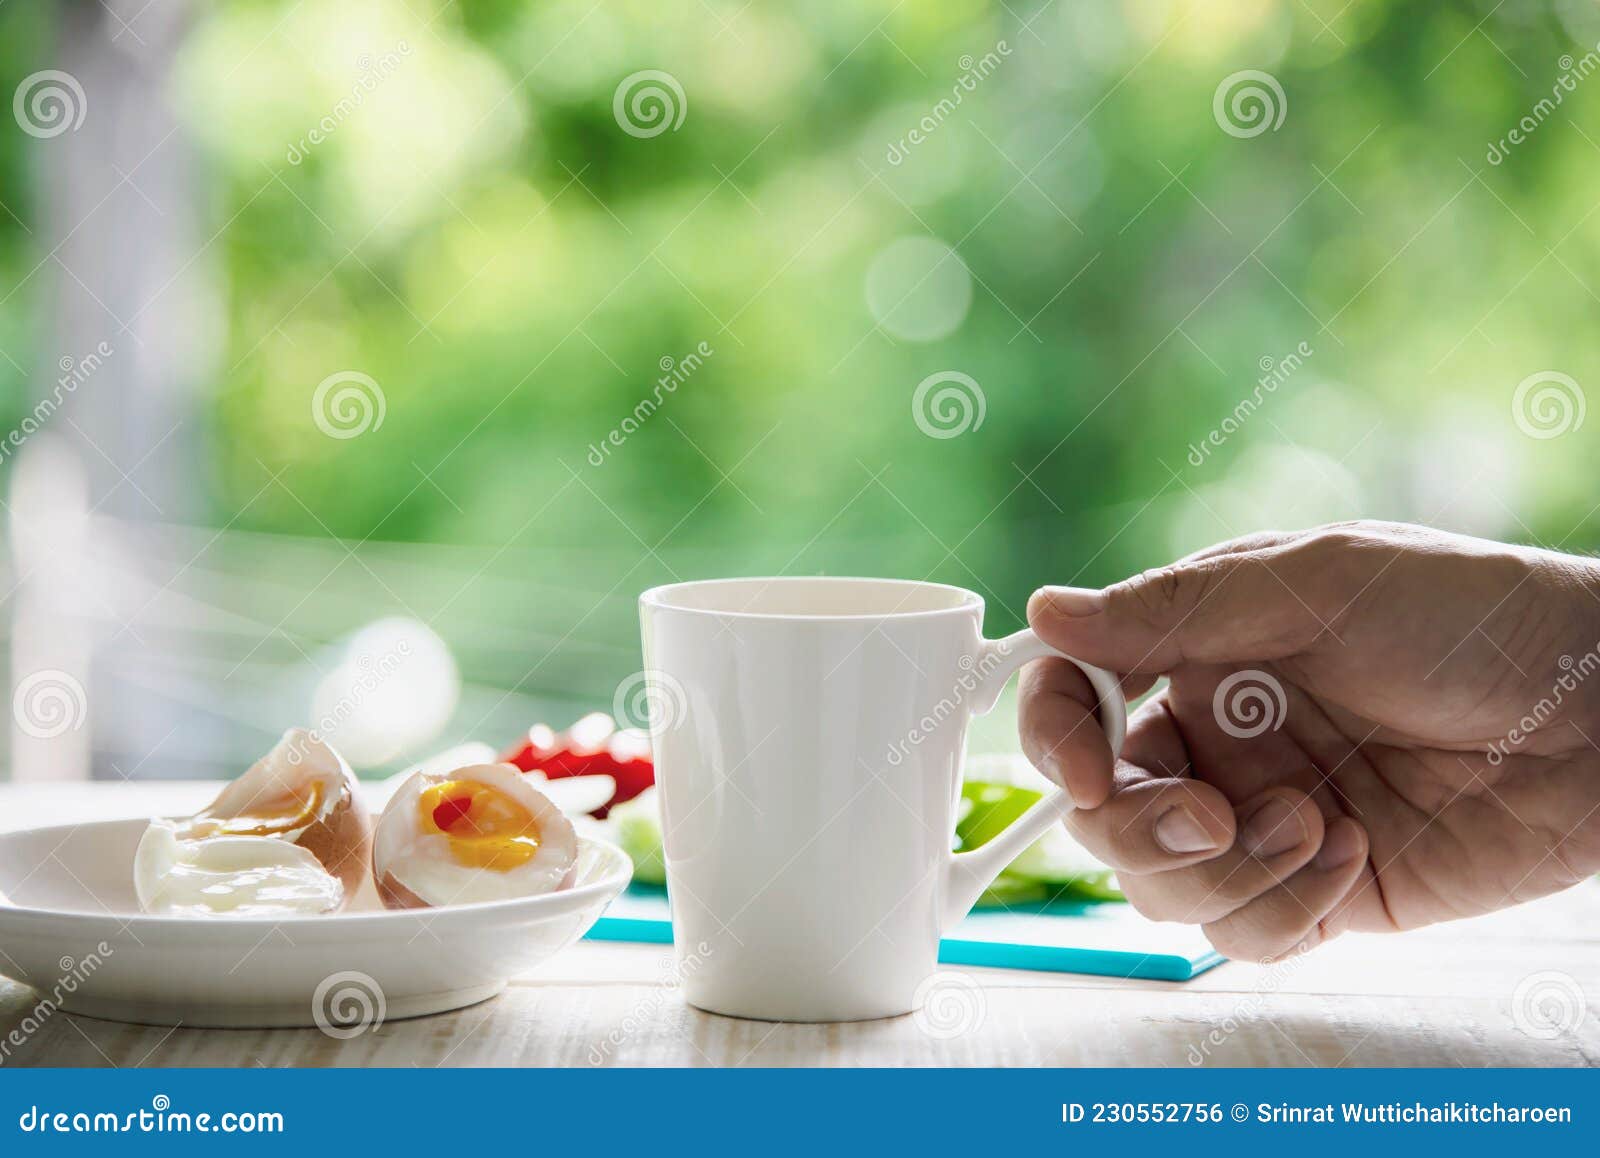 hand hooding hot coffee cup with boiled eggs